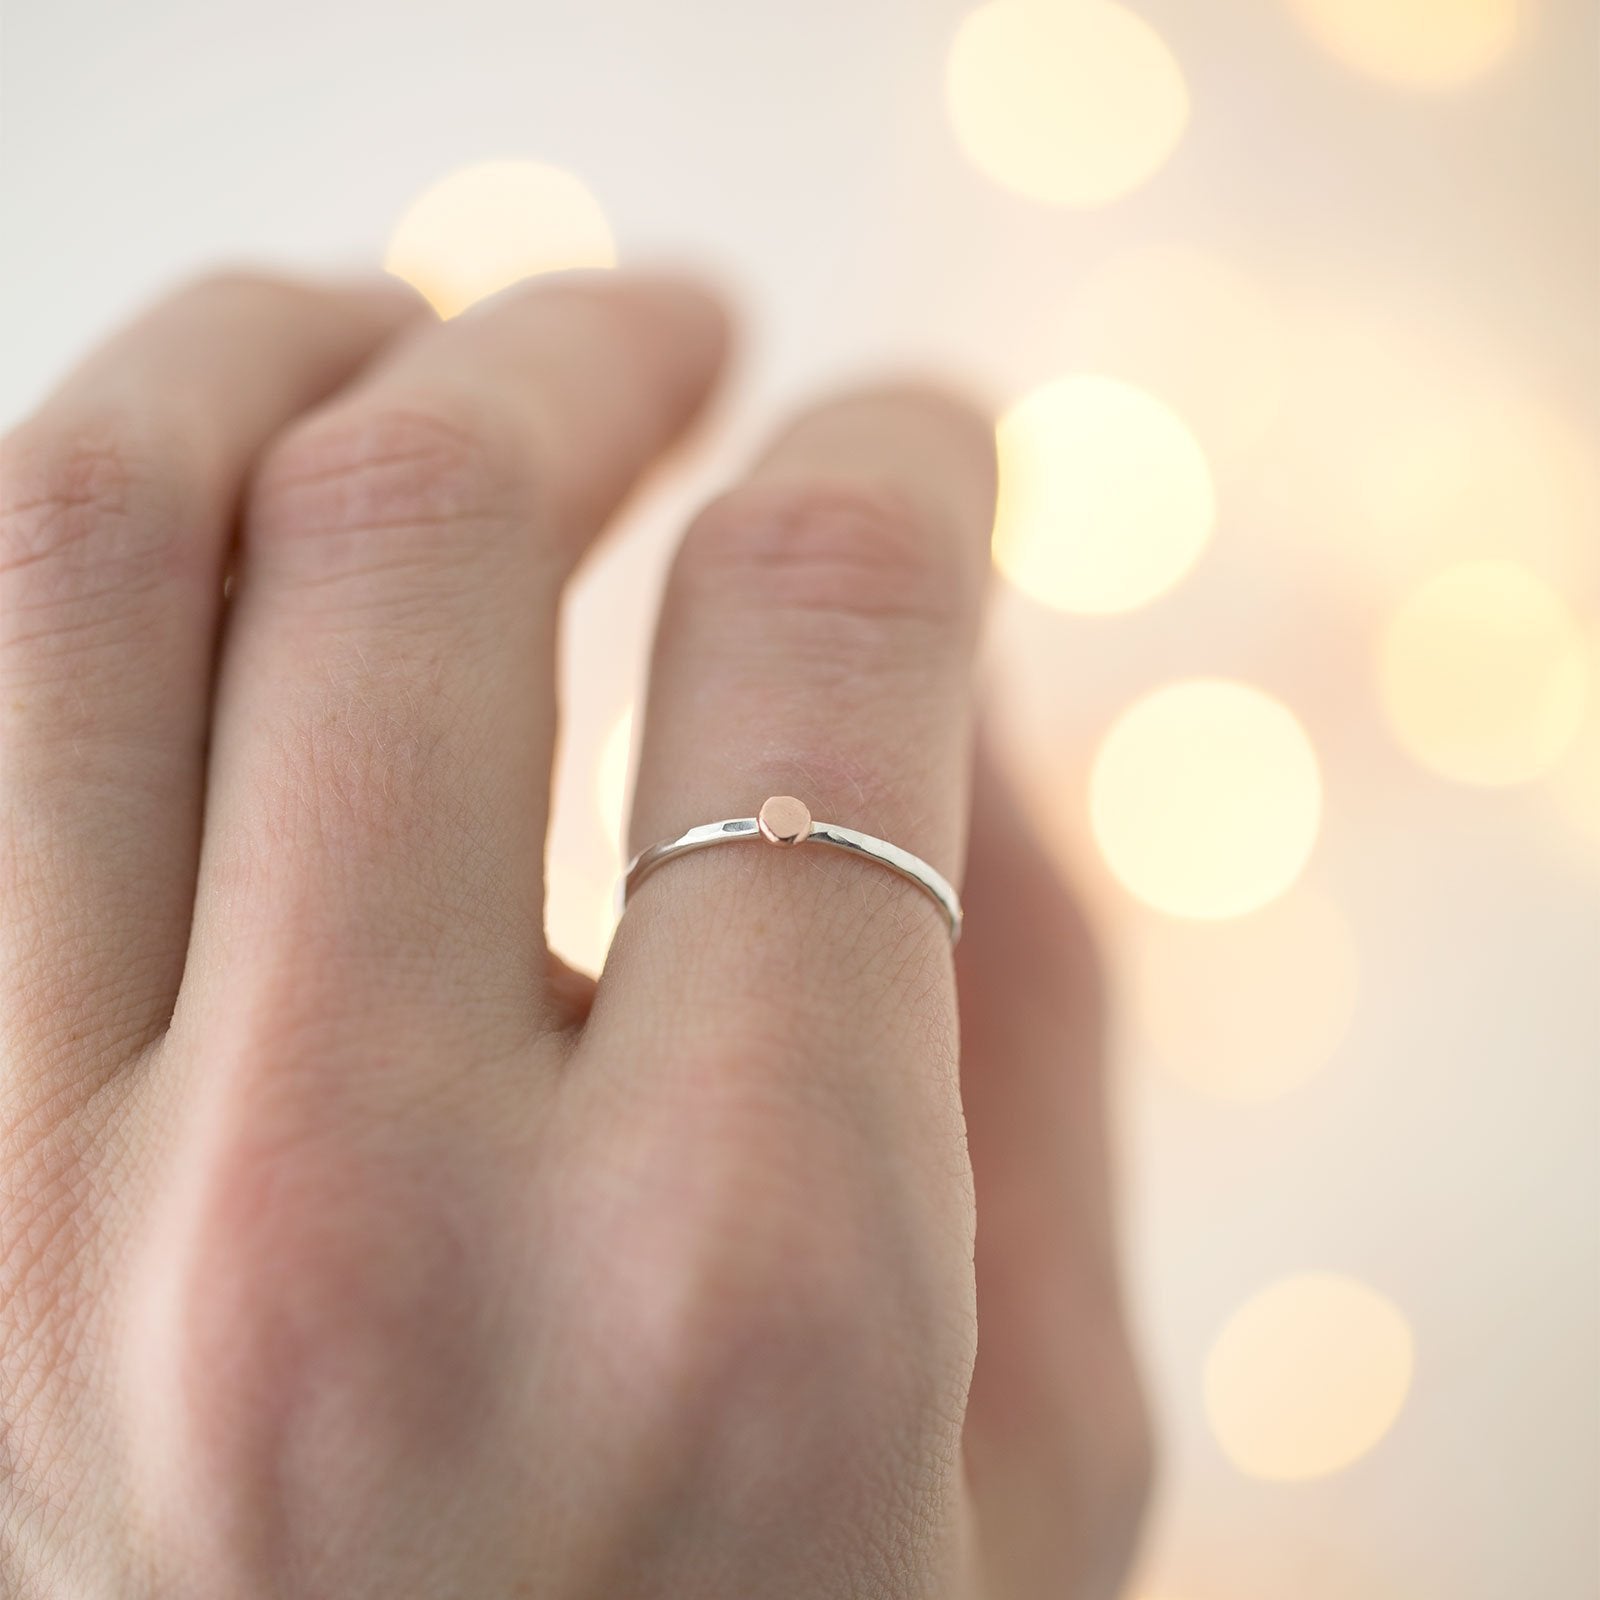 Dainty Dot Ring - Silver/Rose Gold - Handmade Jewelry by Burnish